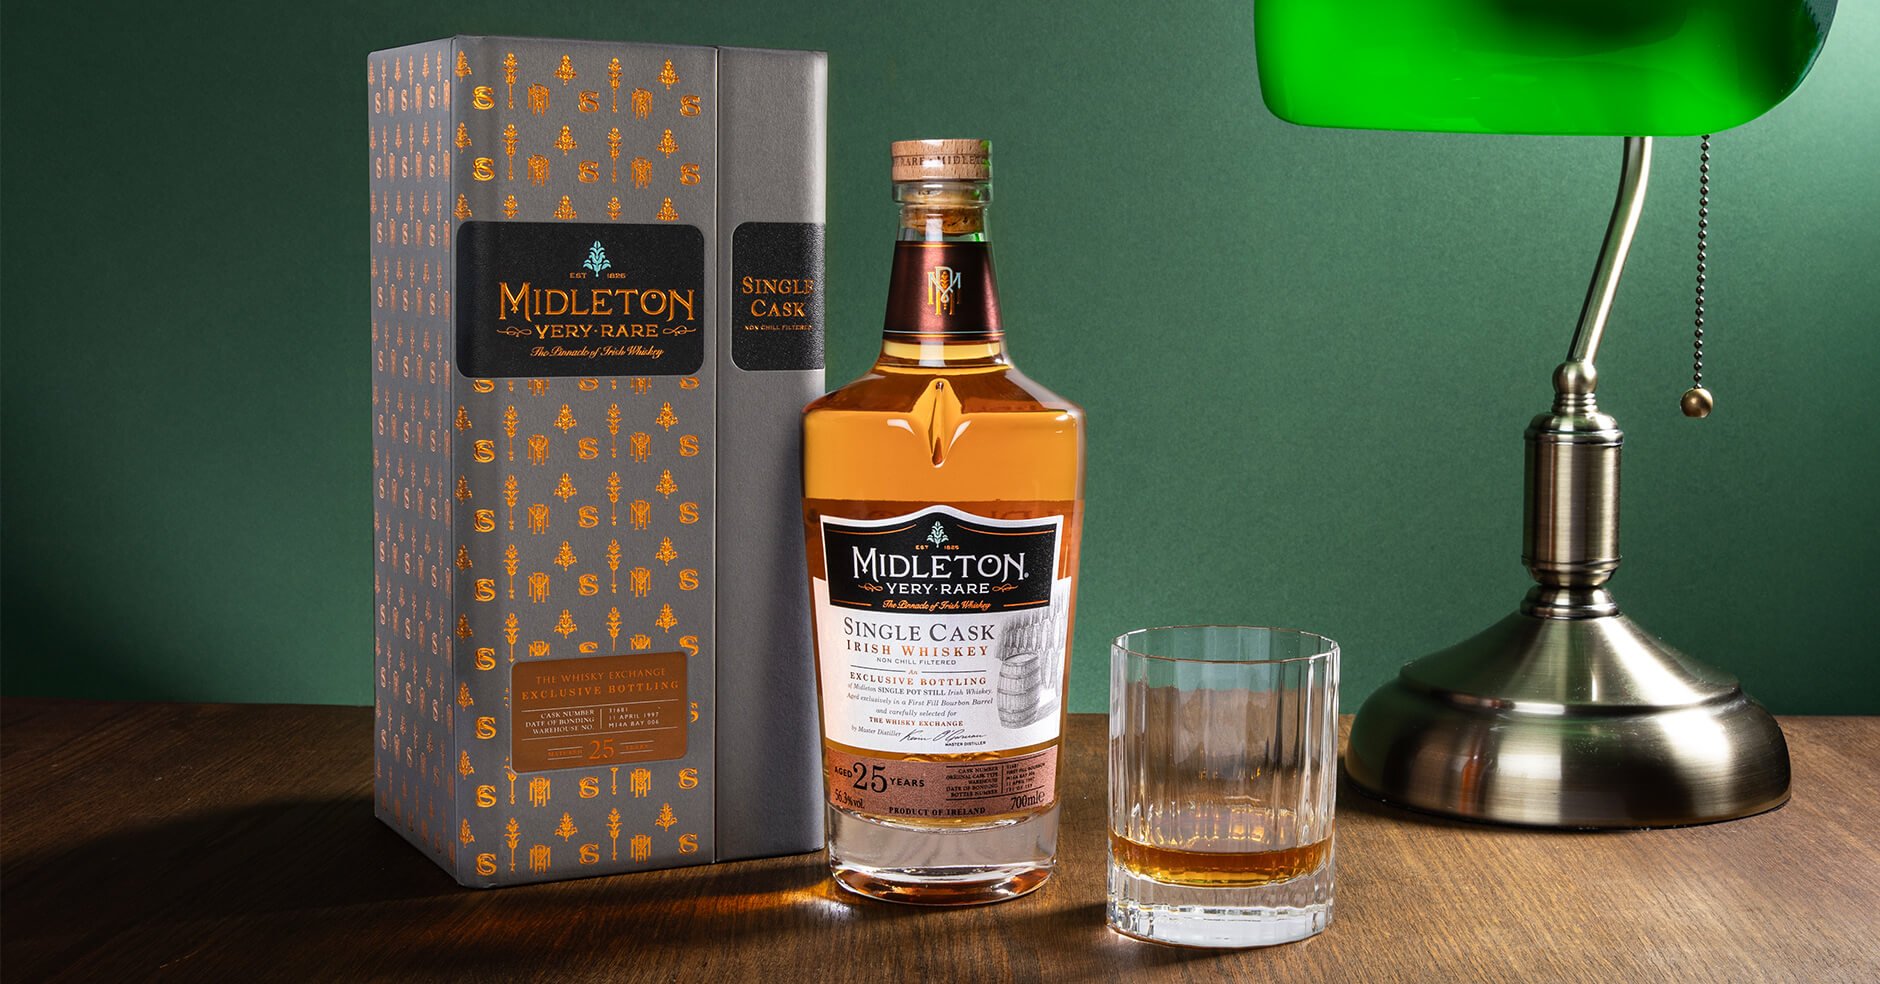 Our Exclusive Midleton Very Rare : The Whisky Exchange